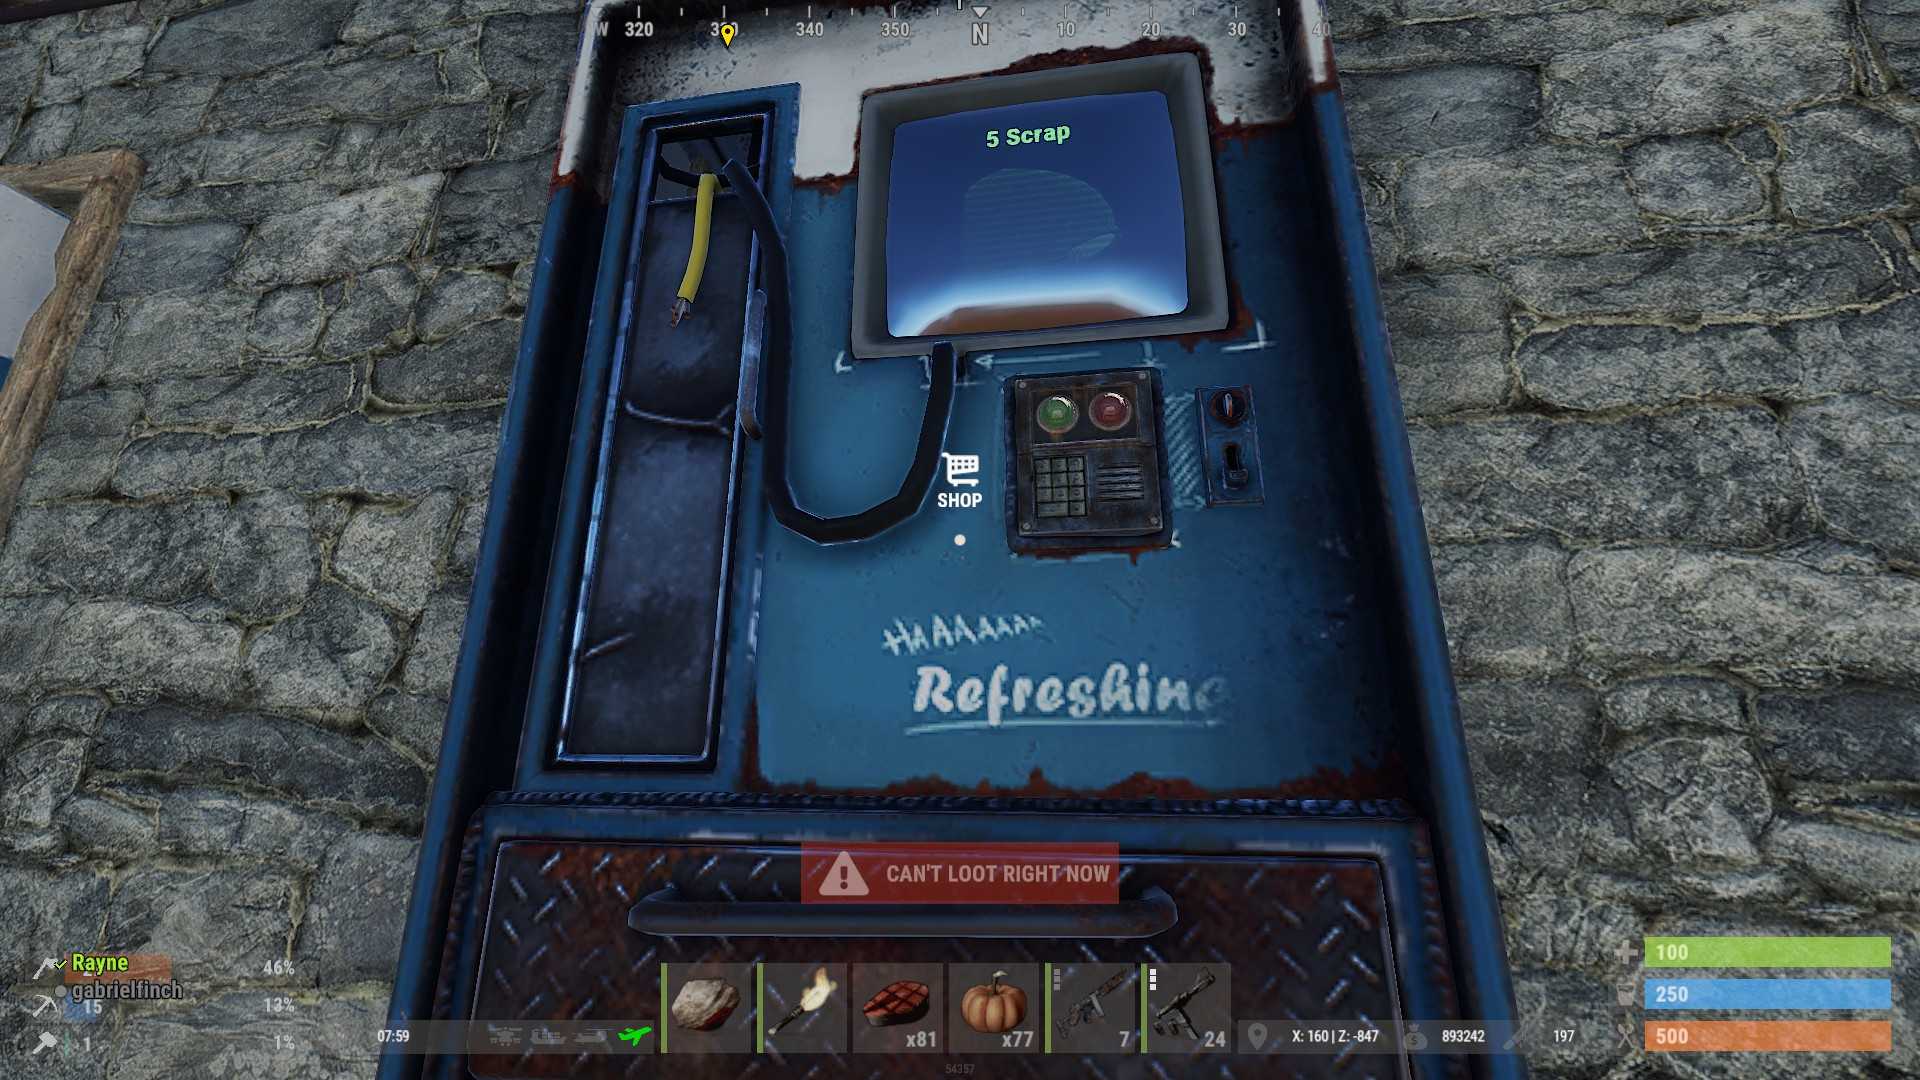 More information about "Vending machine, multiple problems."